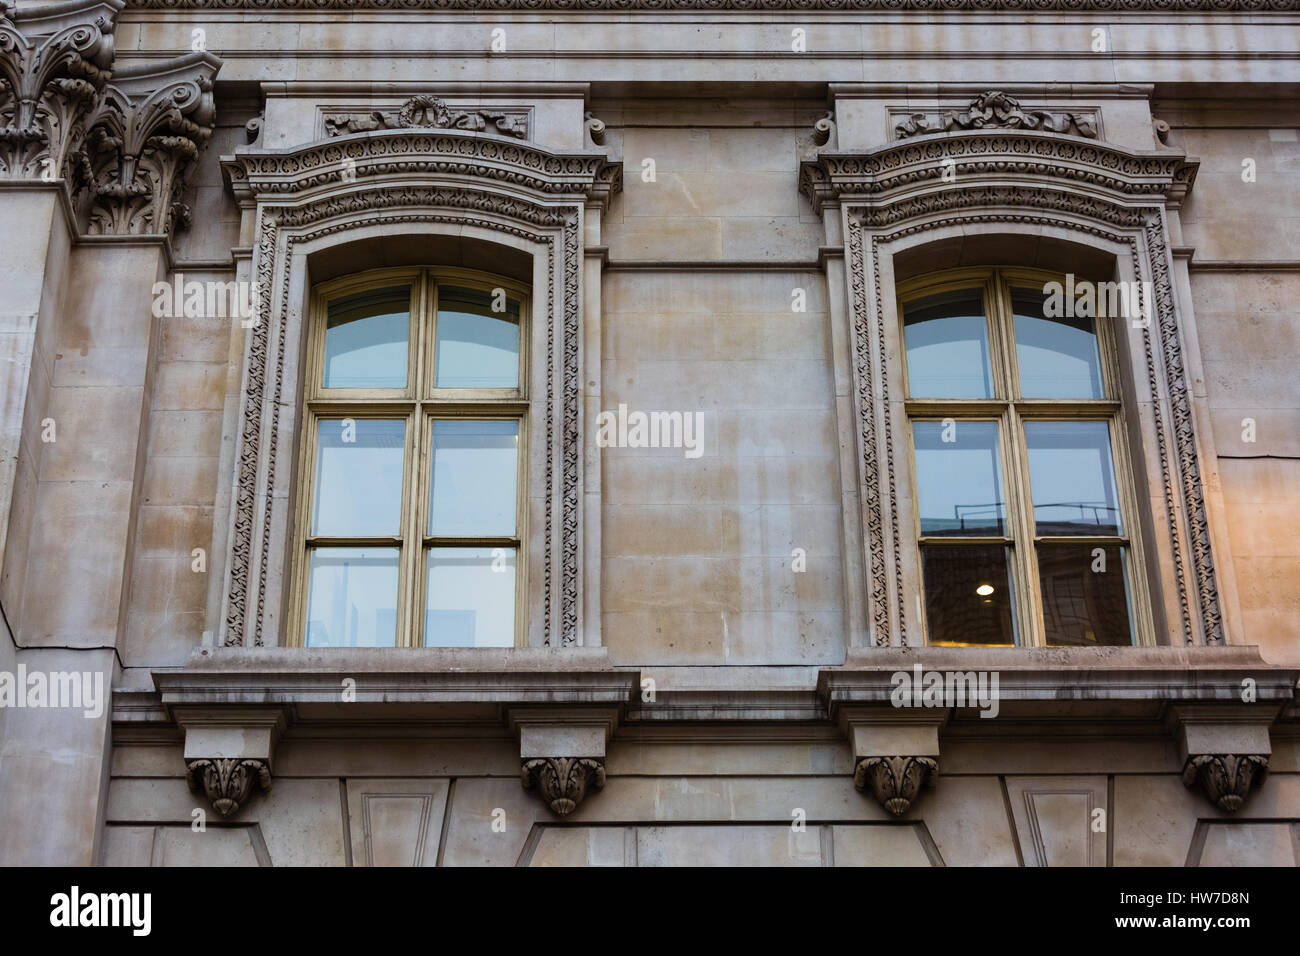 Front facade of a classical architecture style building in London Stock Photo